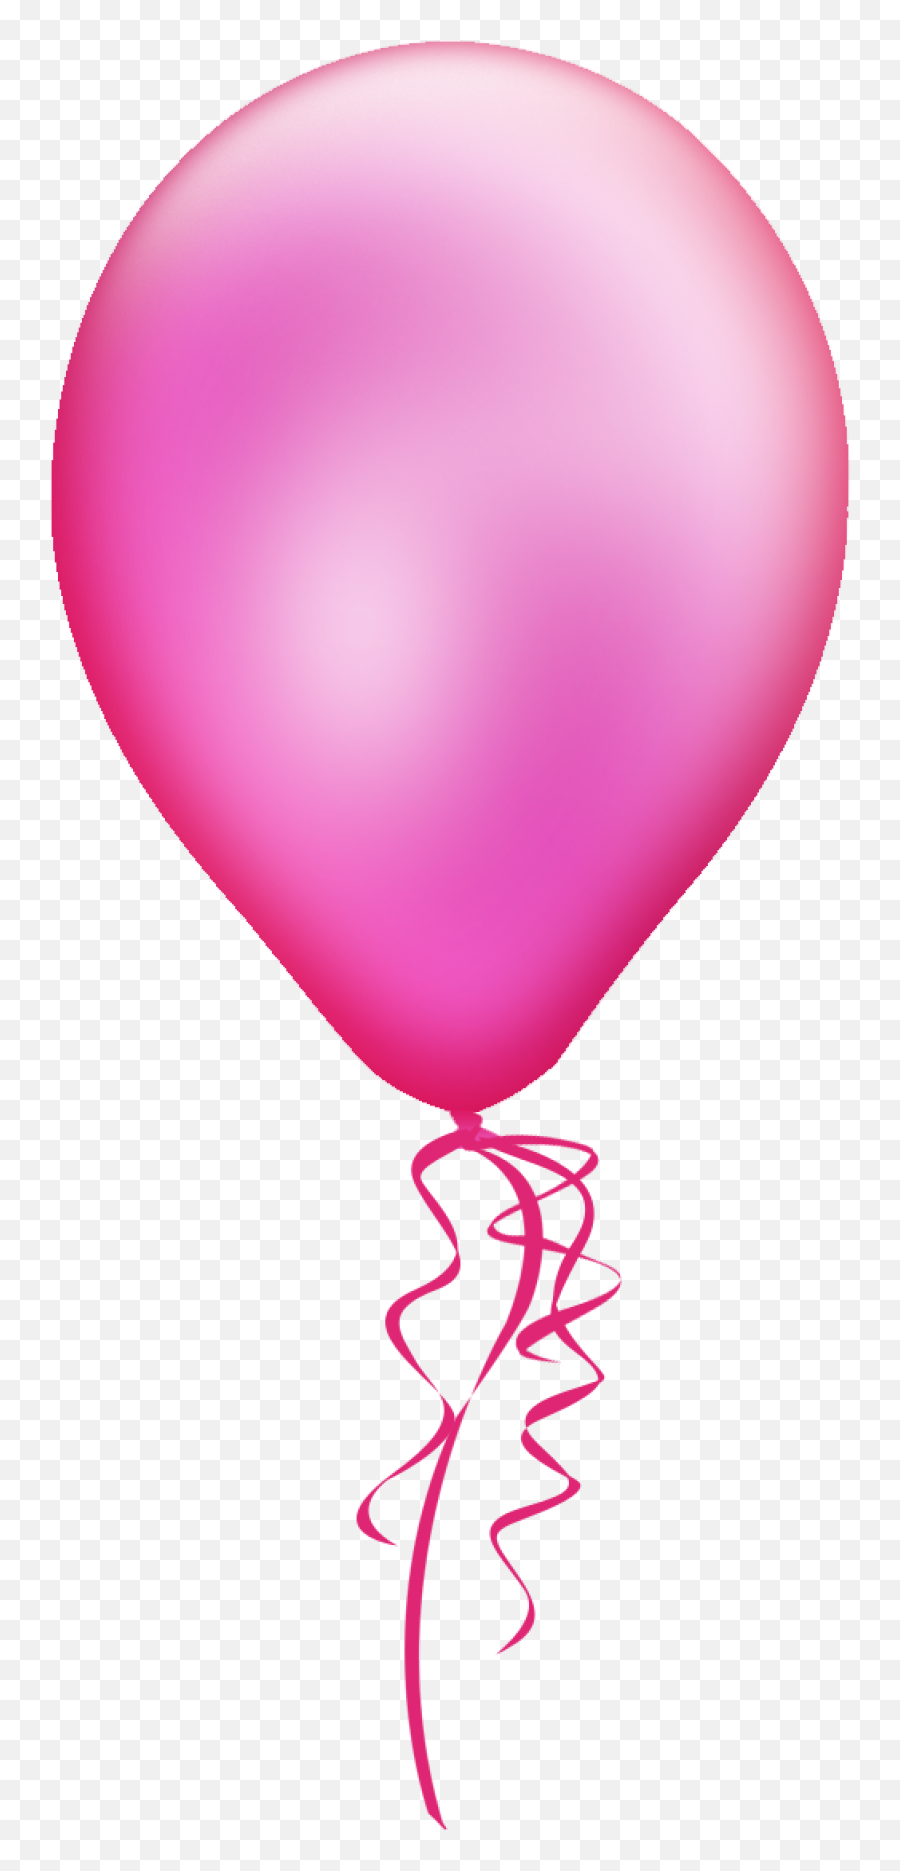 Balloon Png Images Free Picture - Pink Balloon Png Transparent Background,Balloons Png Transparent Background